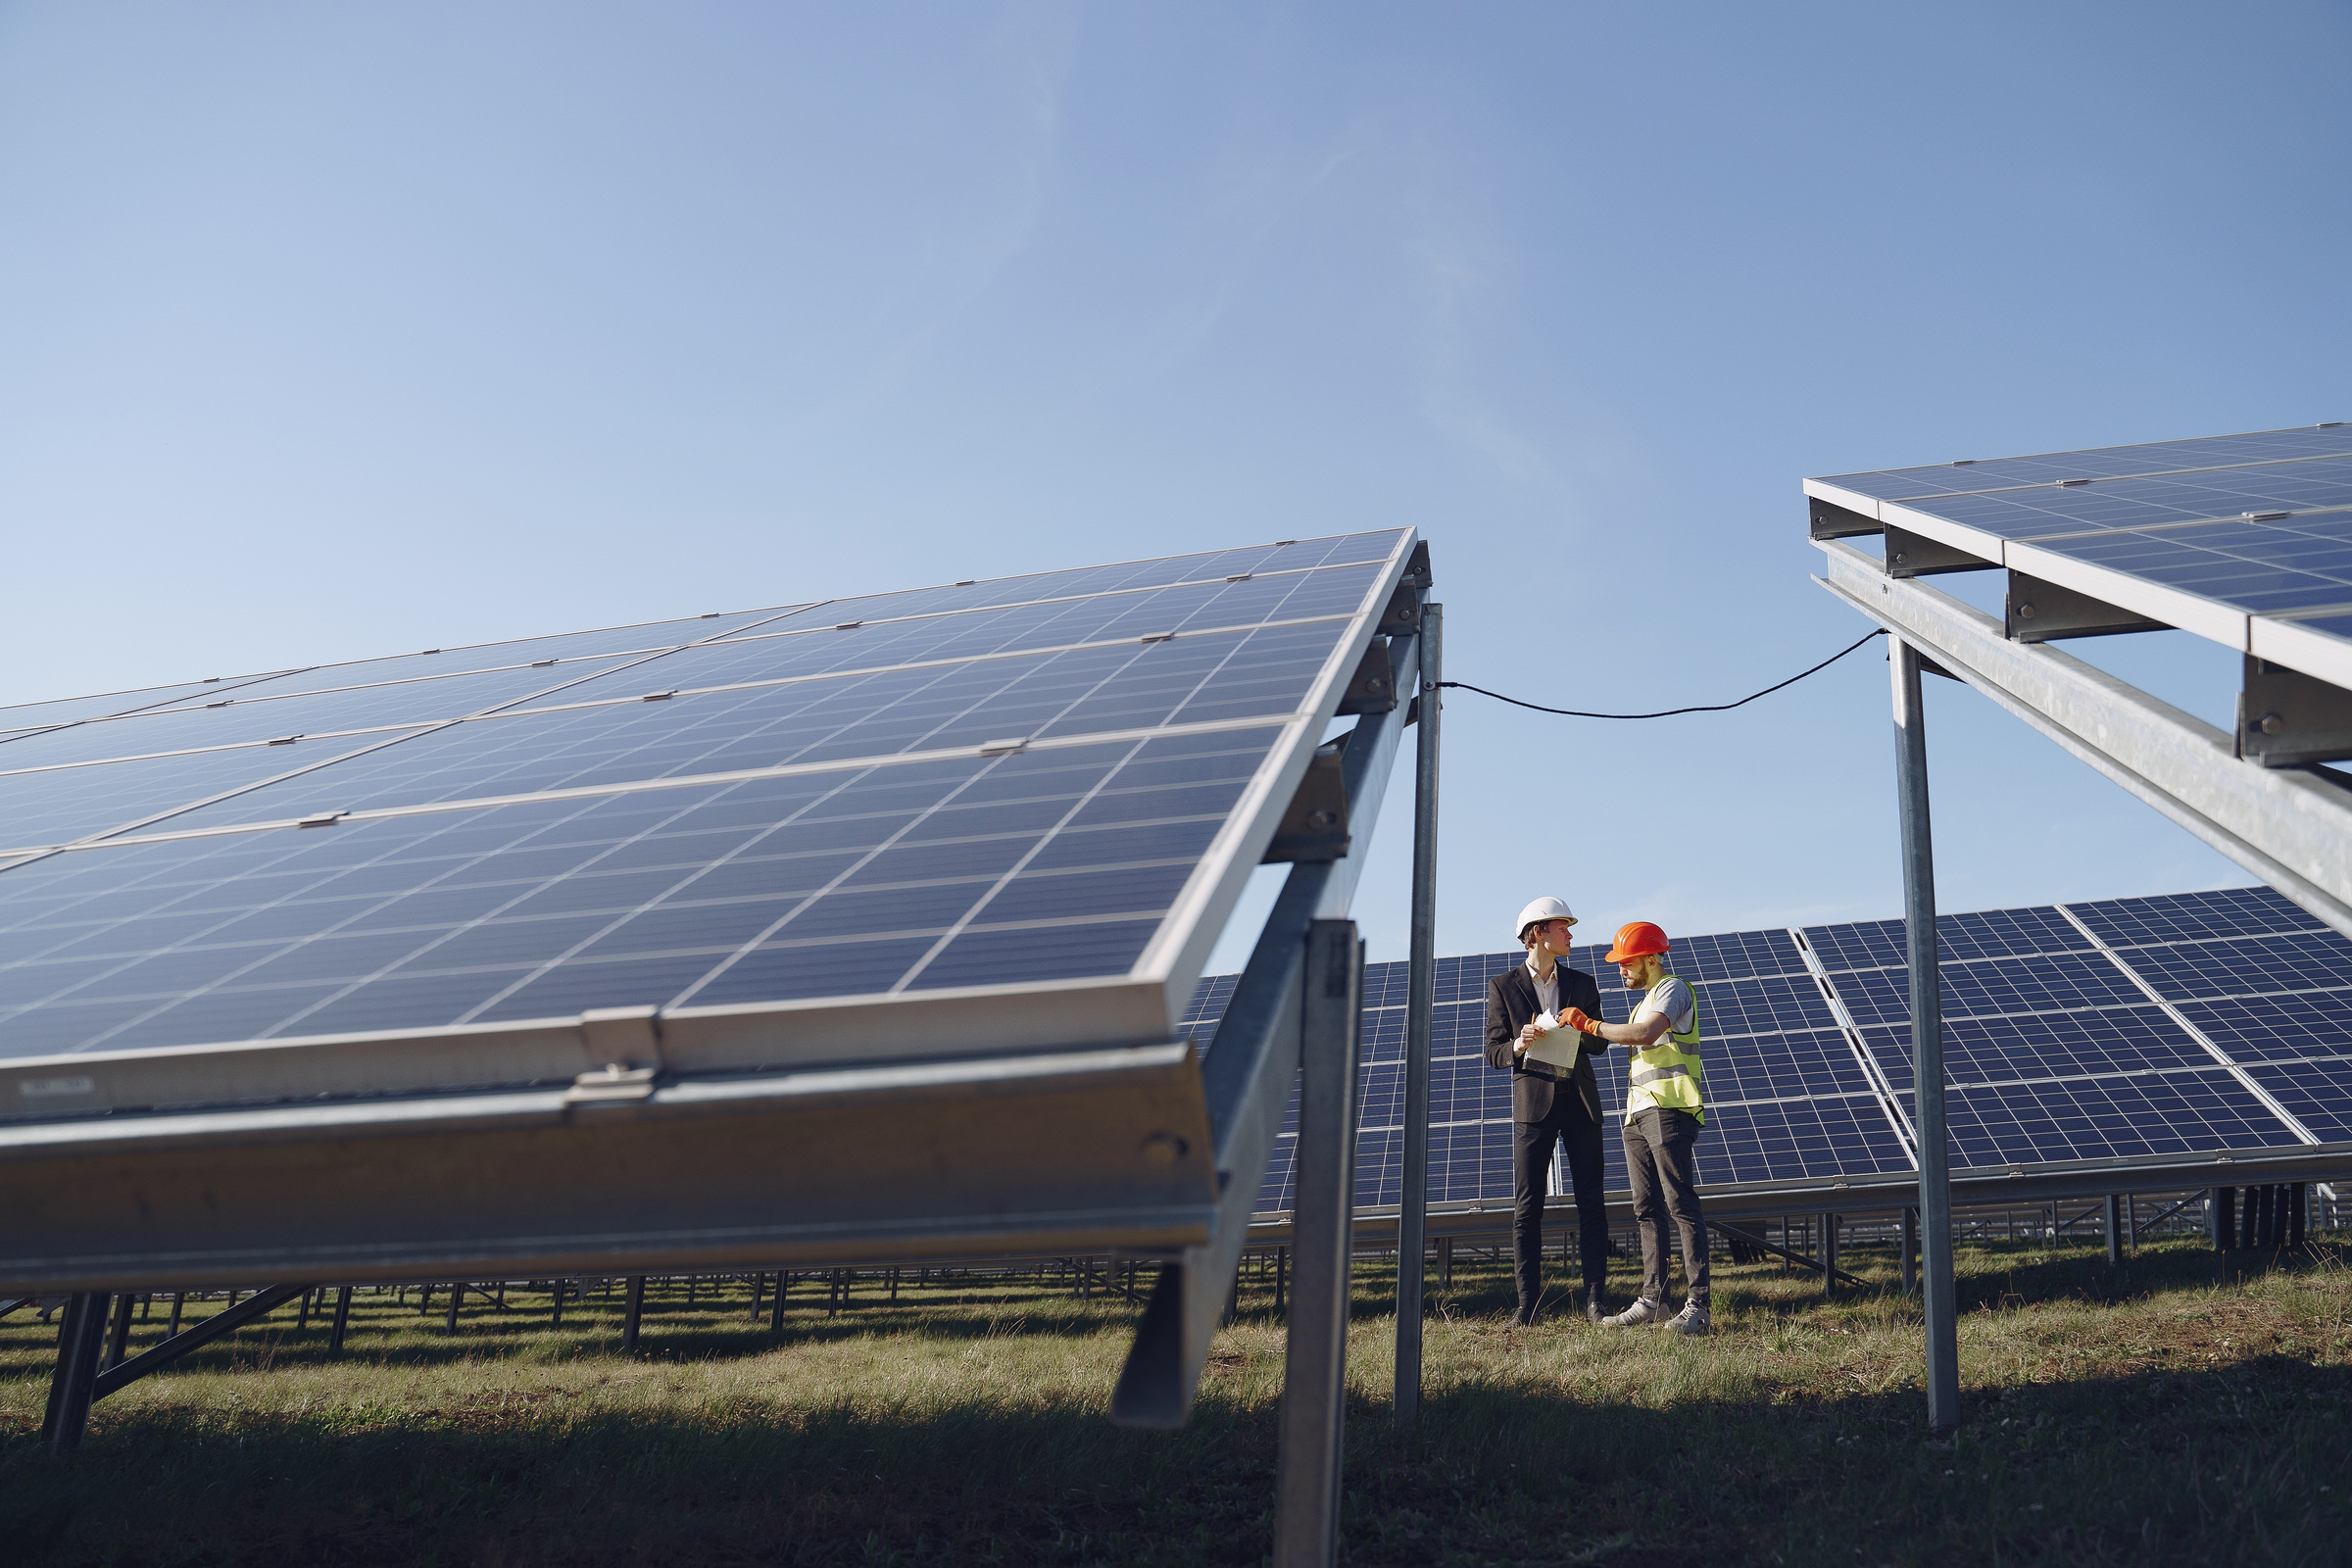 Two Electricians Standing near the Solar Panels